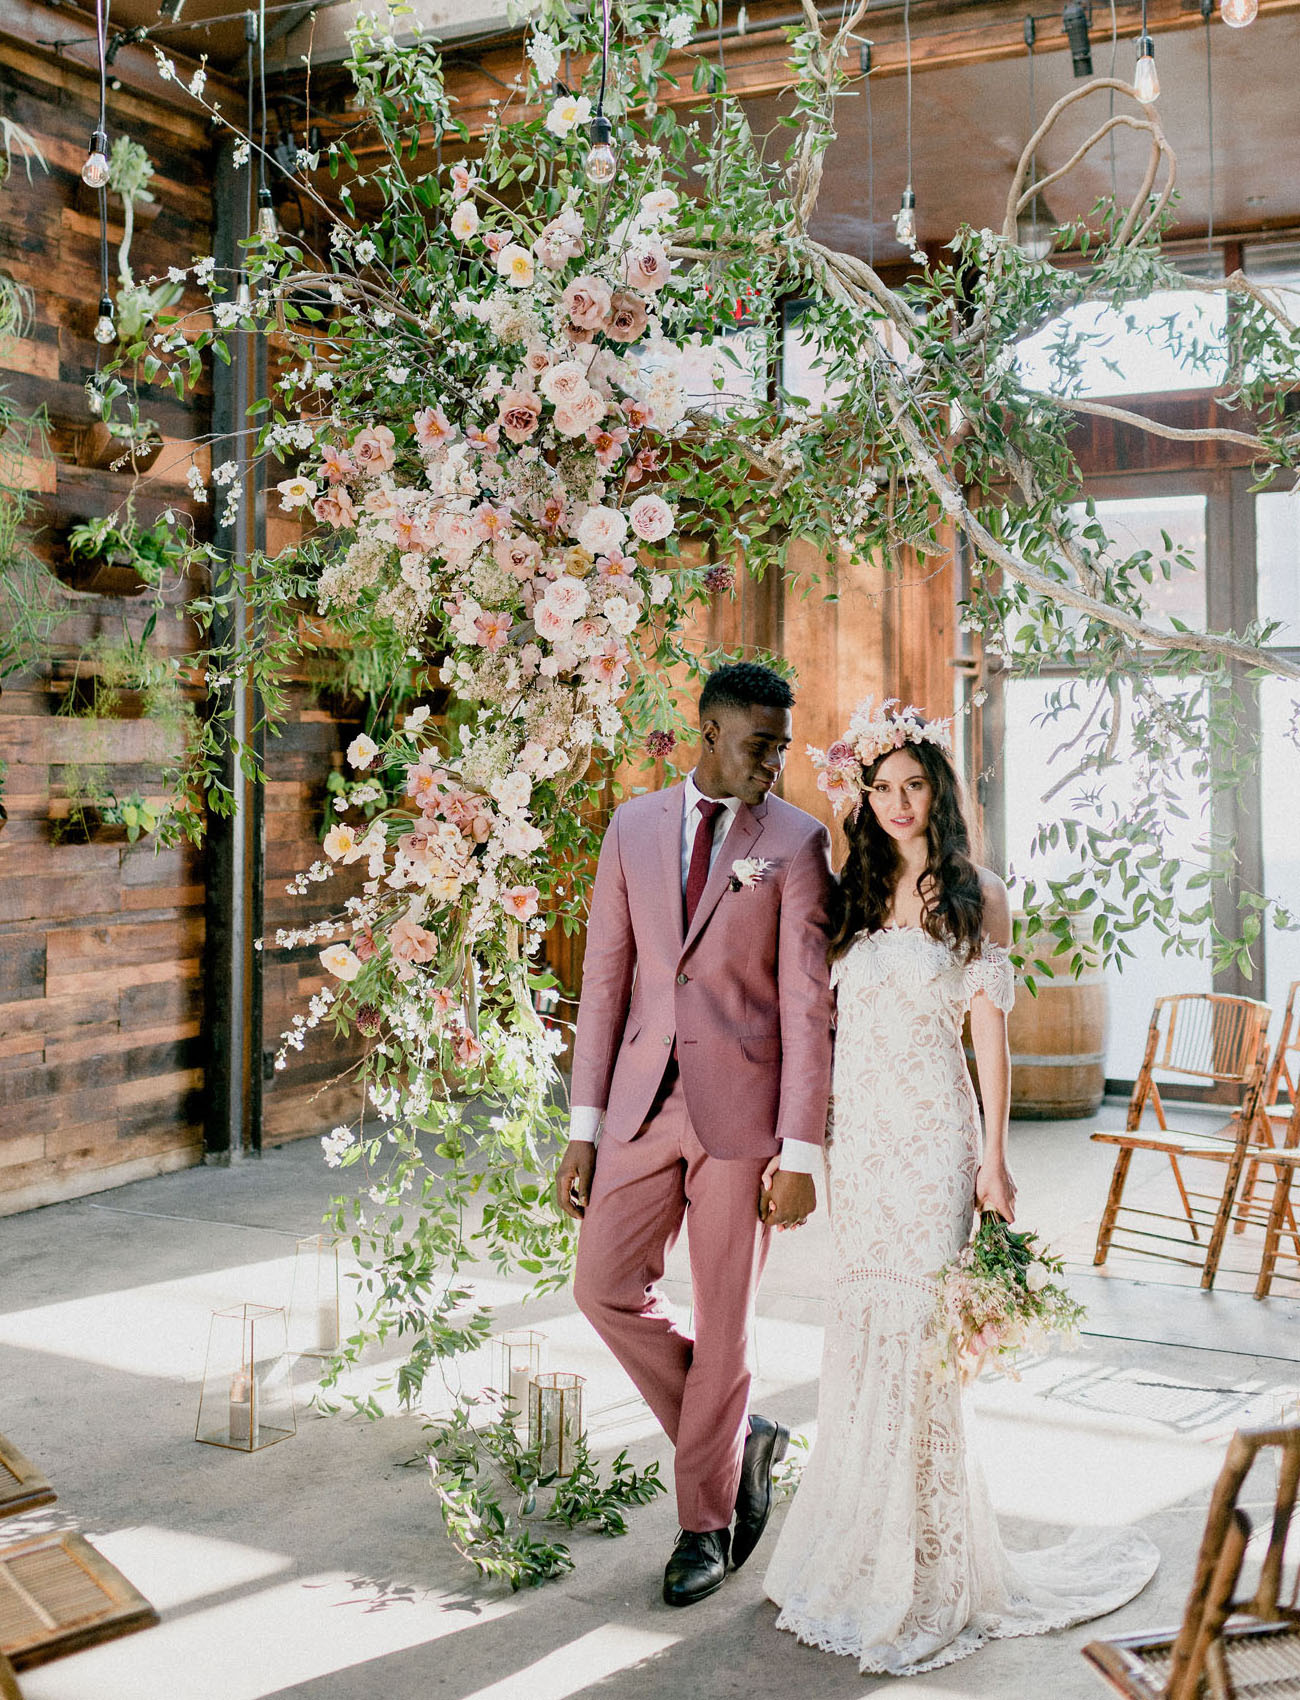 This jaw dropping wedding shoot shows how to completely change any venue in what you want and some examples of boho chic outfits